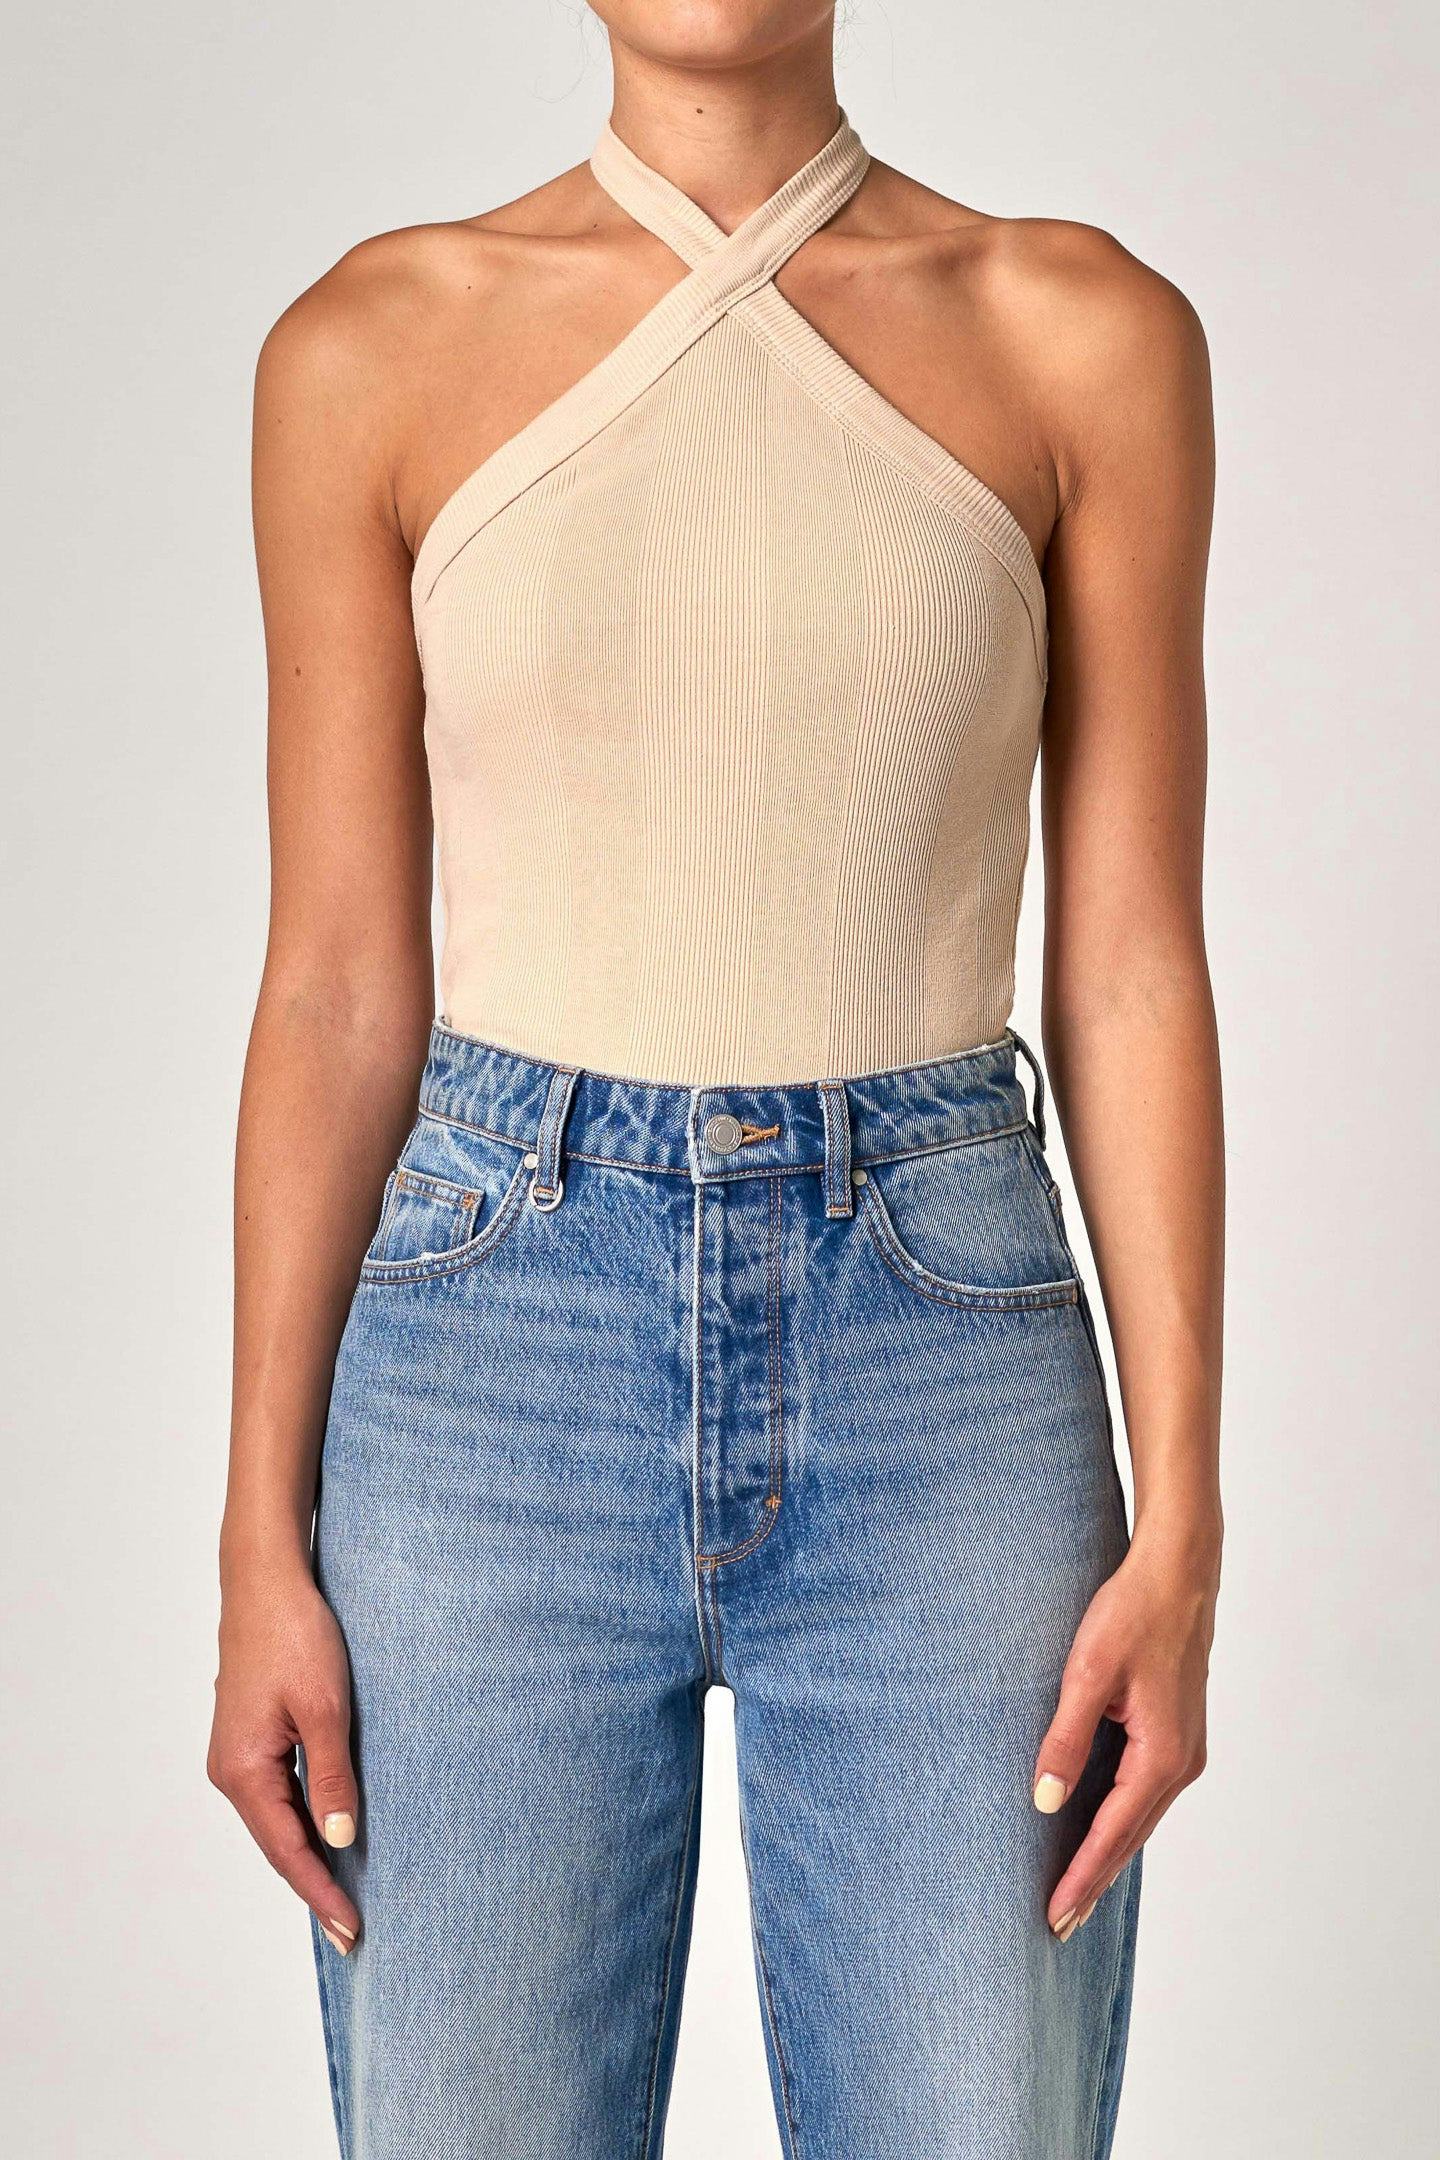 Frenchie Halter Top - Bleached Sand Neuw straight peach womens-blouse 